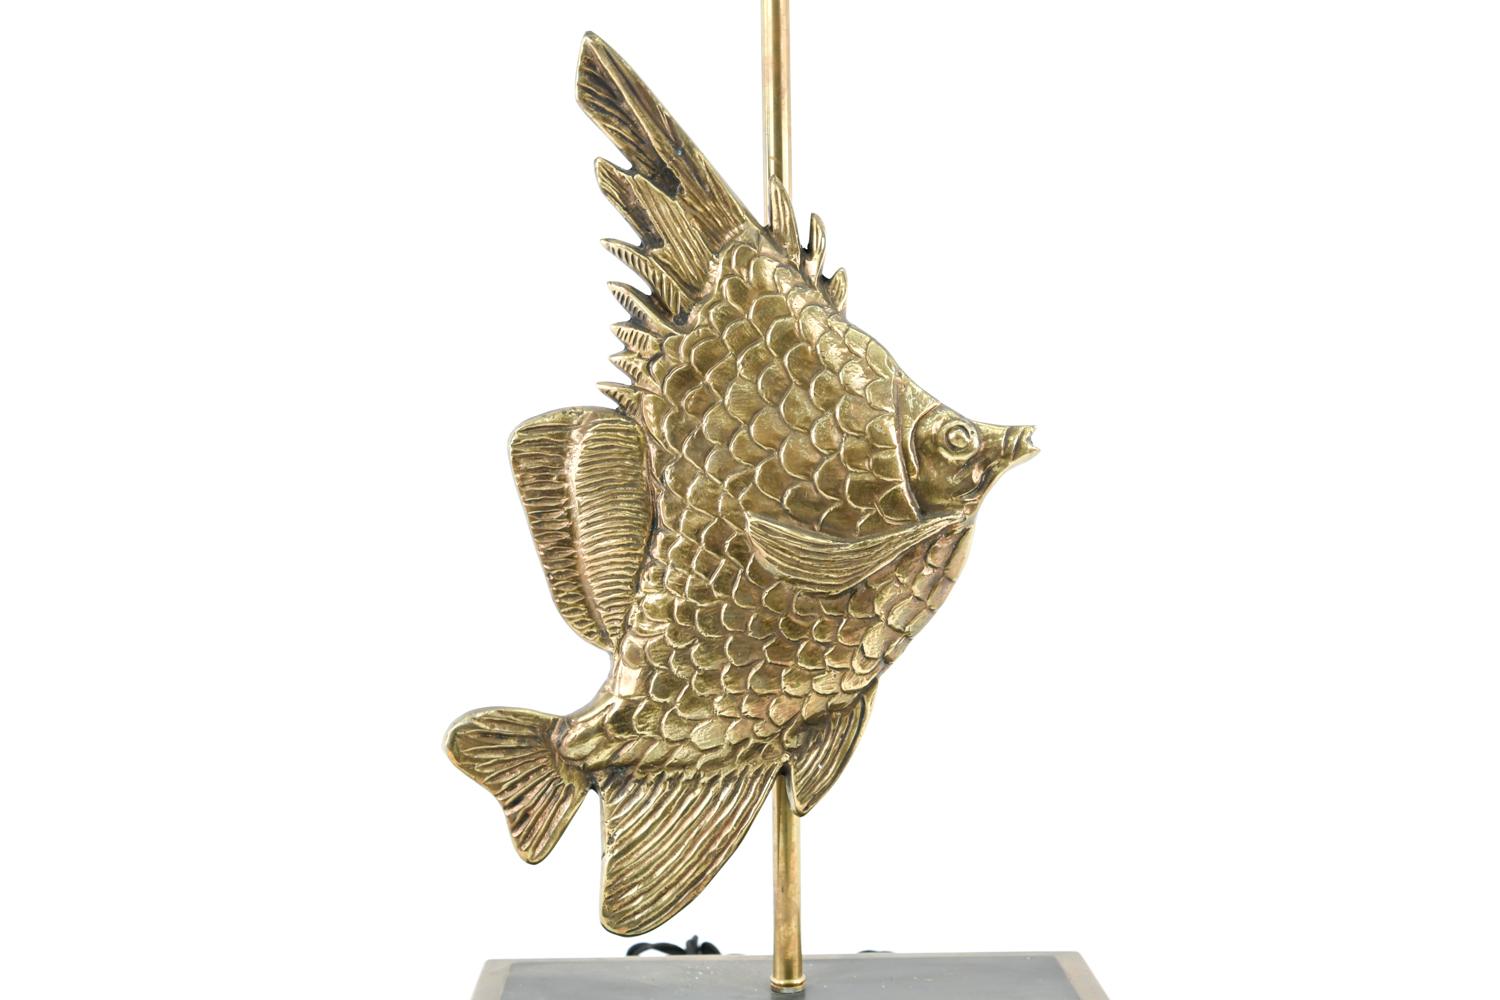 Bring the beach to your home with this fun and playful mid-century French brass lamp in the form of a fish! This lamp is ideal Palm Beach inspiration and will brighten up a room both figuratively and literally. No visible signature or maker's mark.